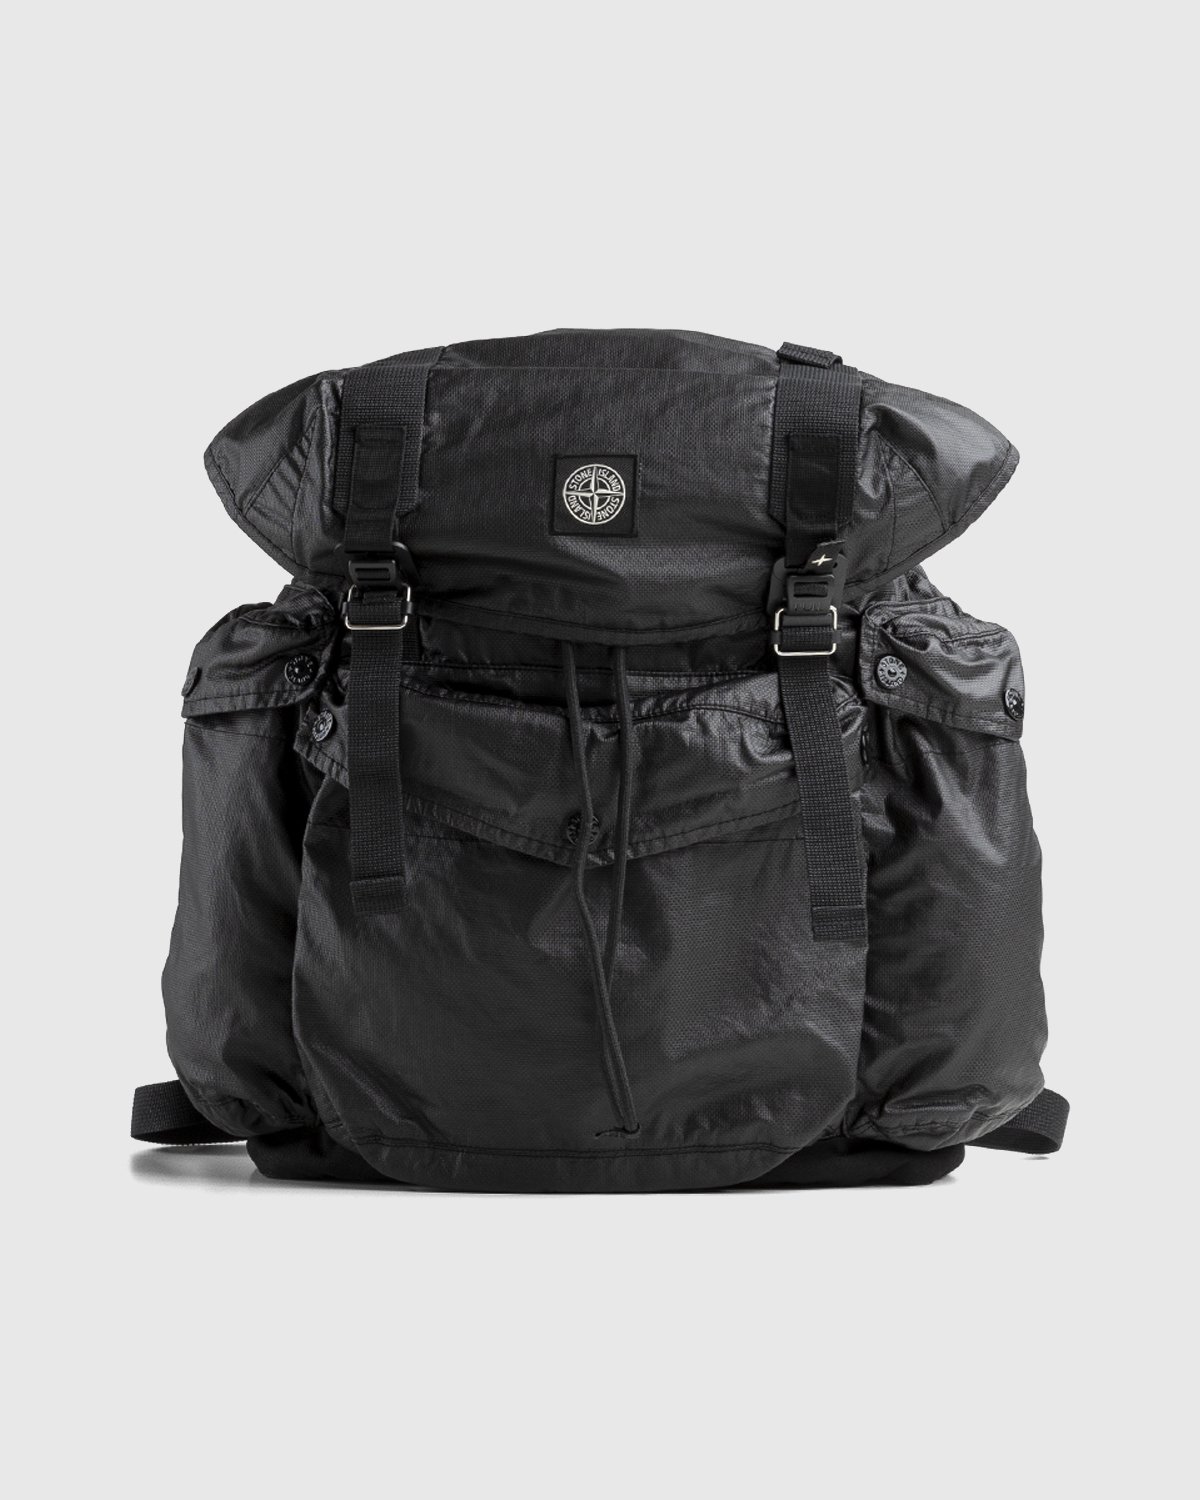 Stone Island - Dyed Backpack Black - Accessories - Black - Image 1